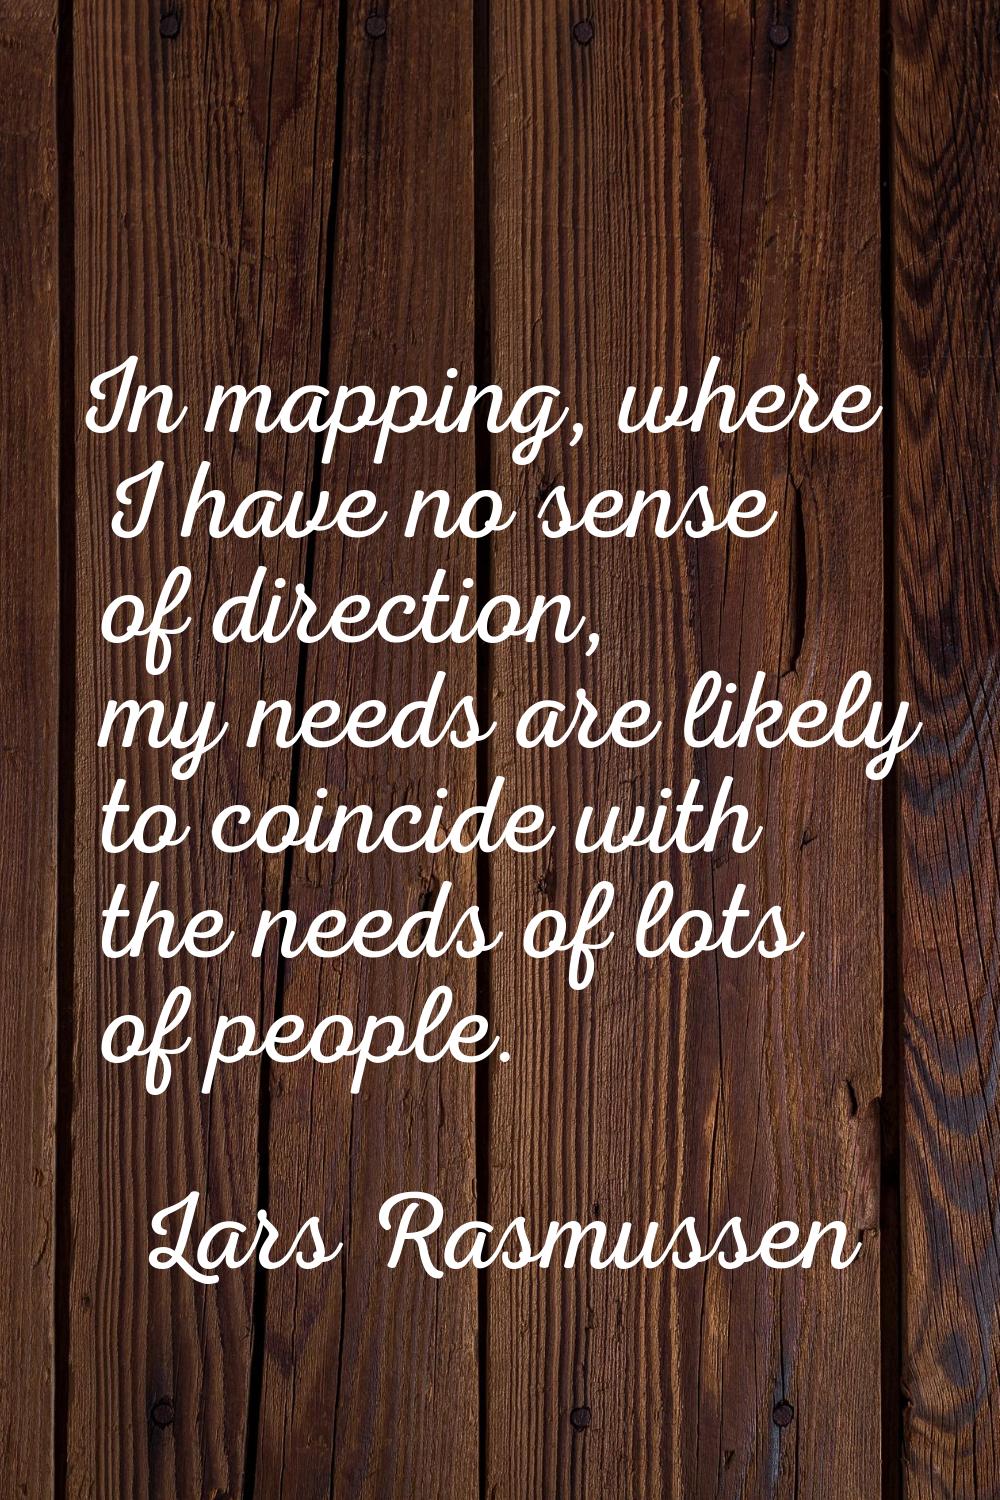 In mapping, where I have no sense of direction, my needs are likely to coincide with the needs of l